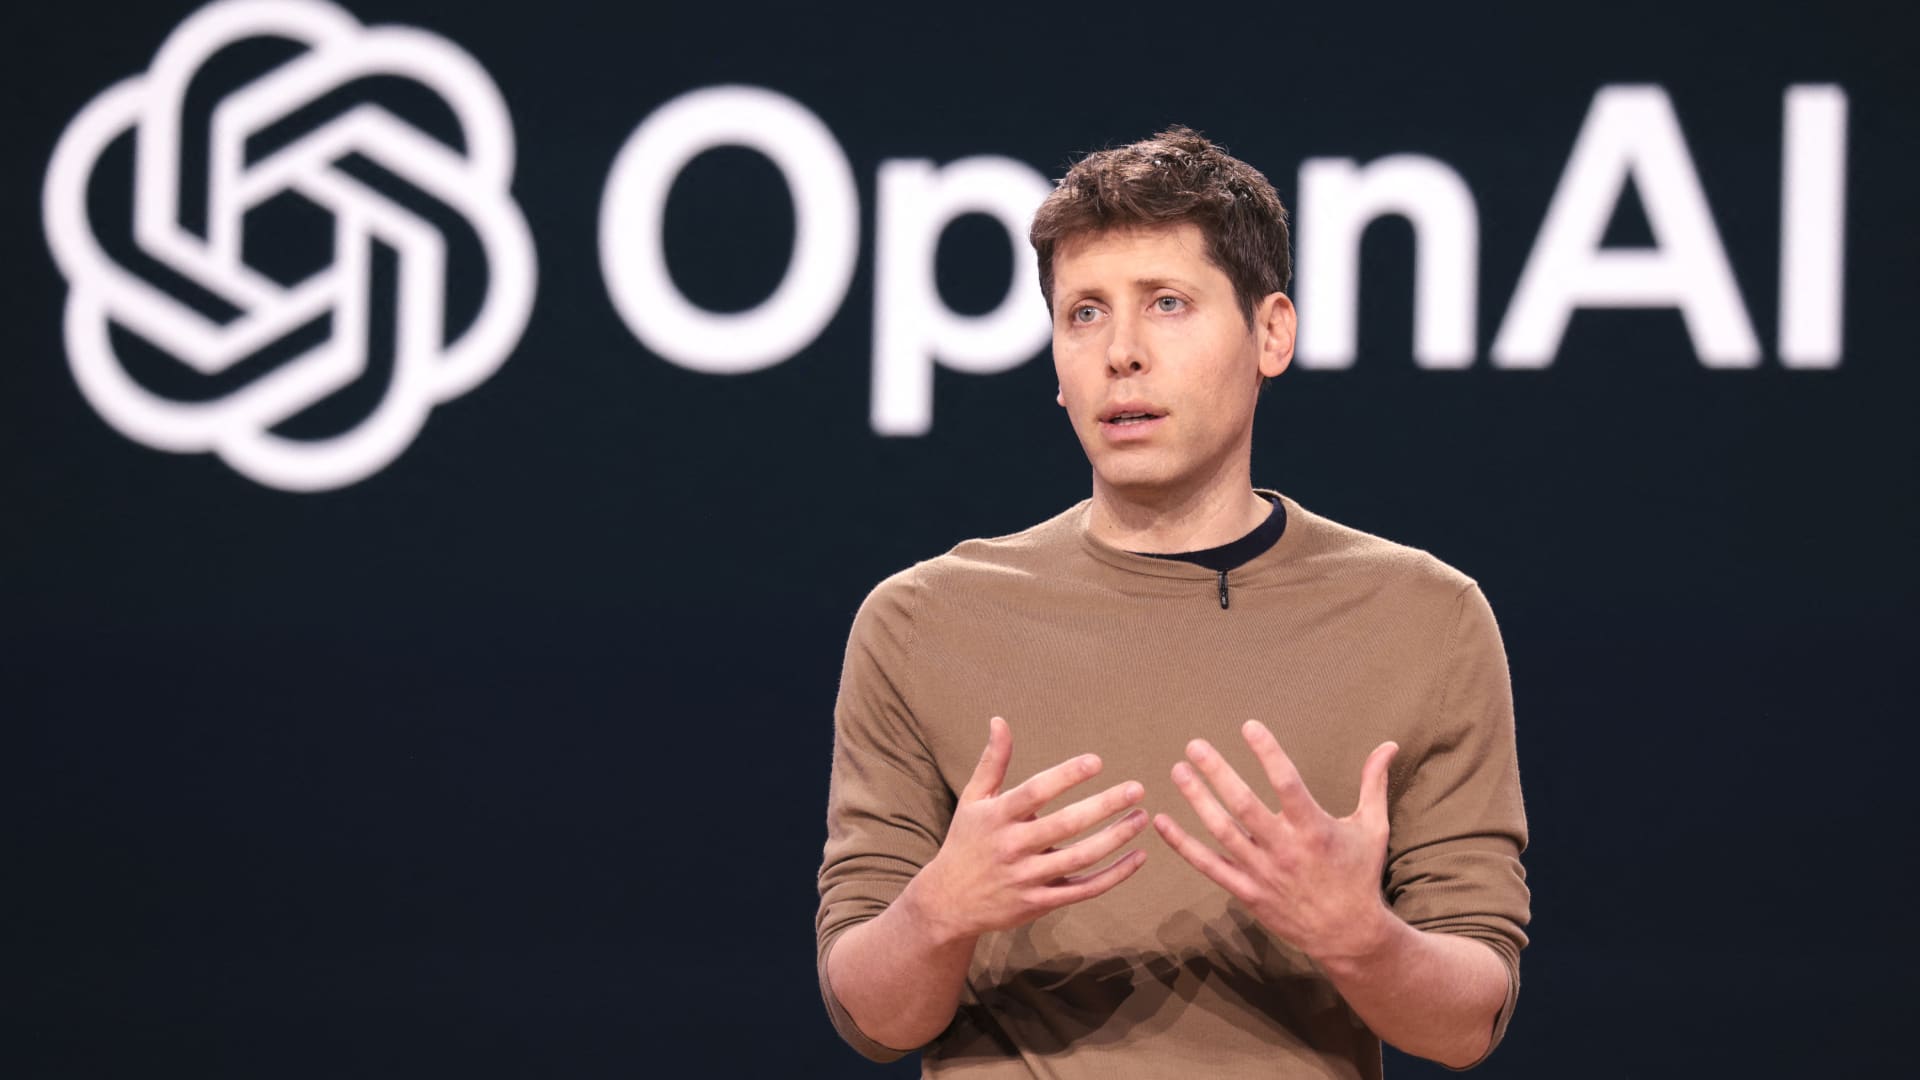 OpenAI open letter warns of AI's 'serious risk' and lack of oversight